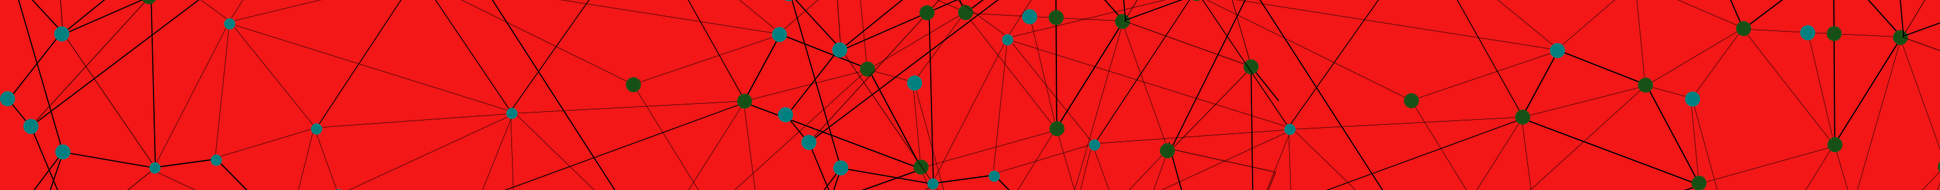 abstract image of networked nodes with a red background